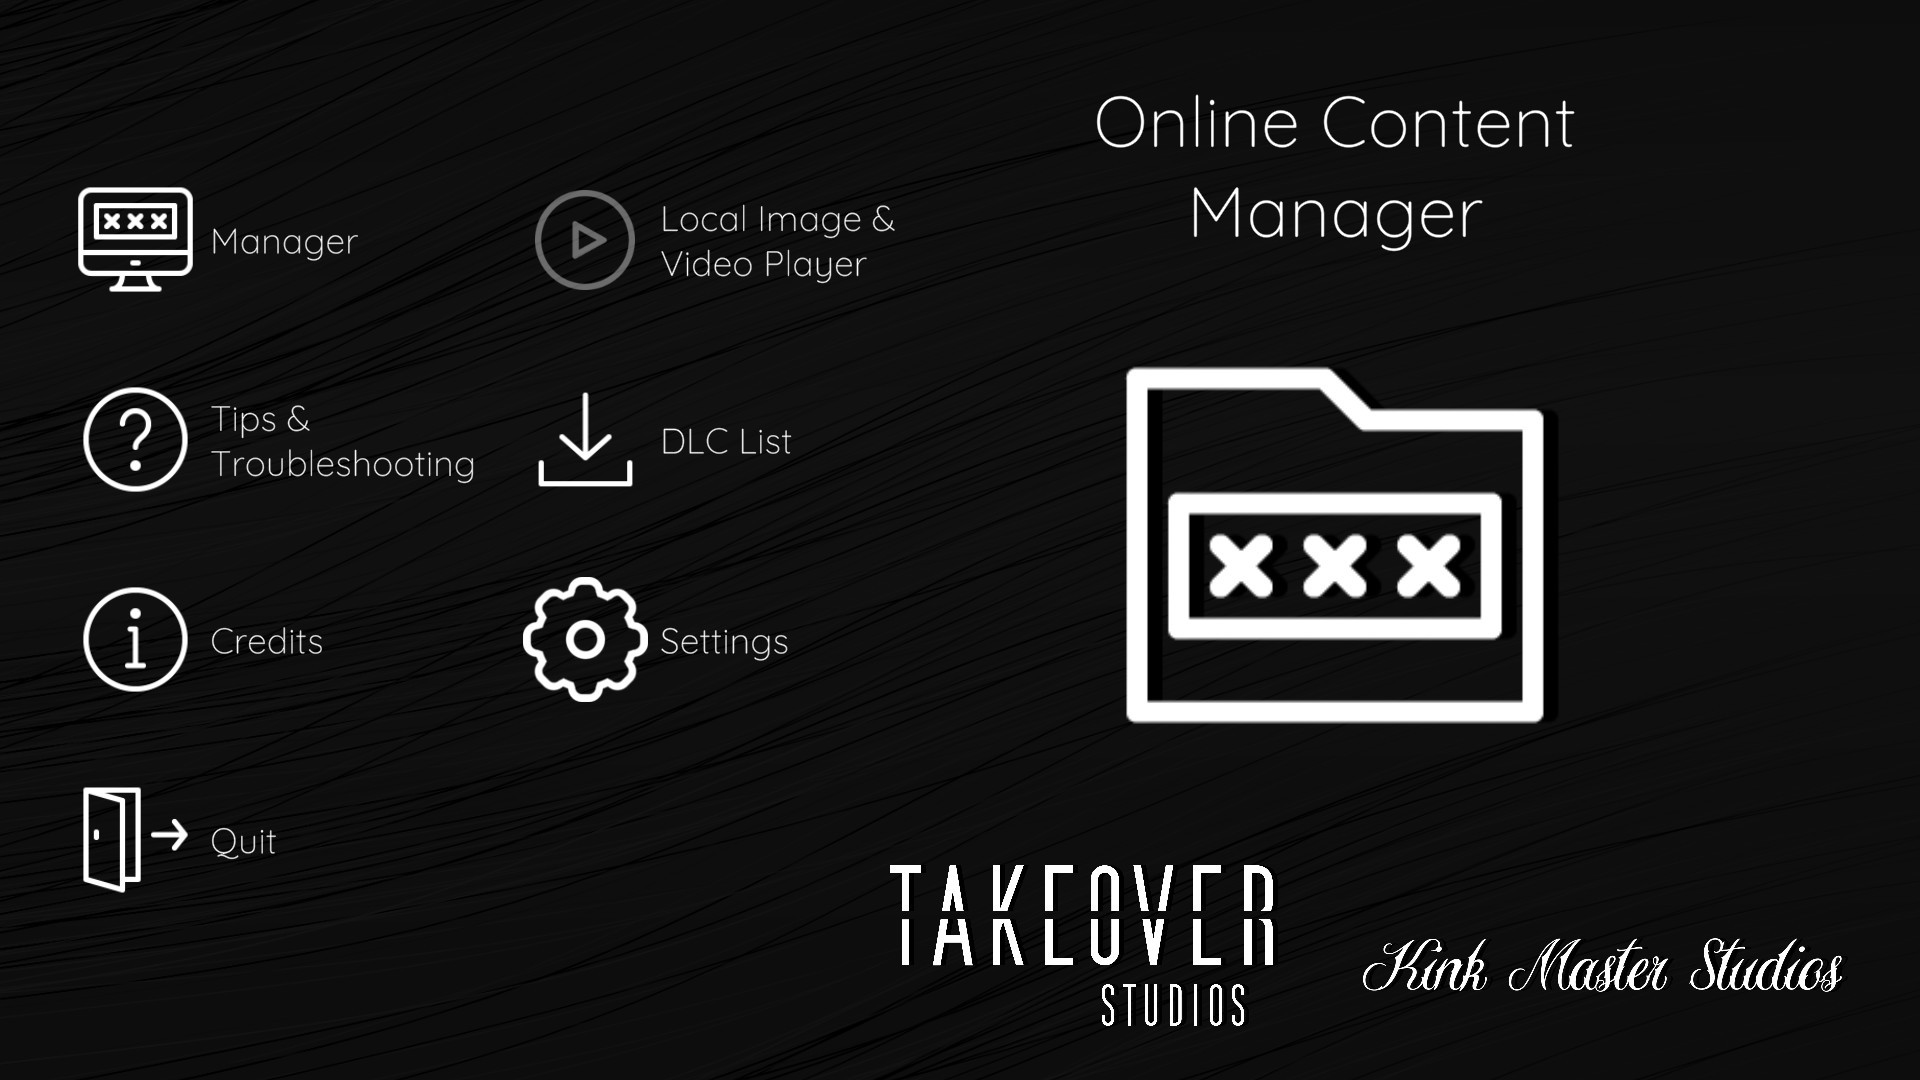 Online Adult Content Manager - Online Content Manager Featured Screenshot #1